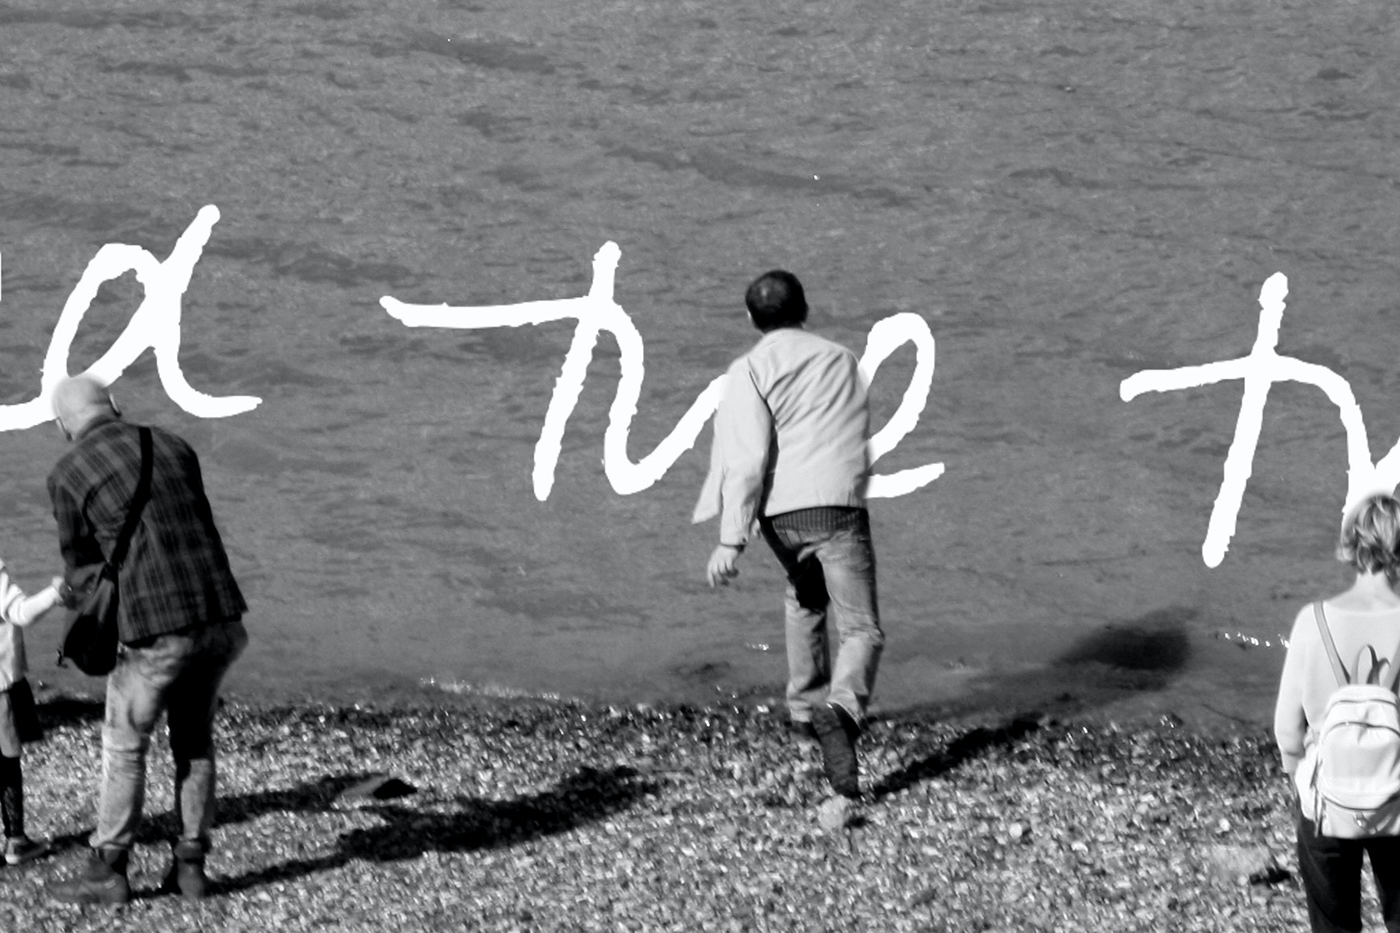 text handwriting type beach London thames lies reflection black and white city